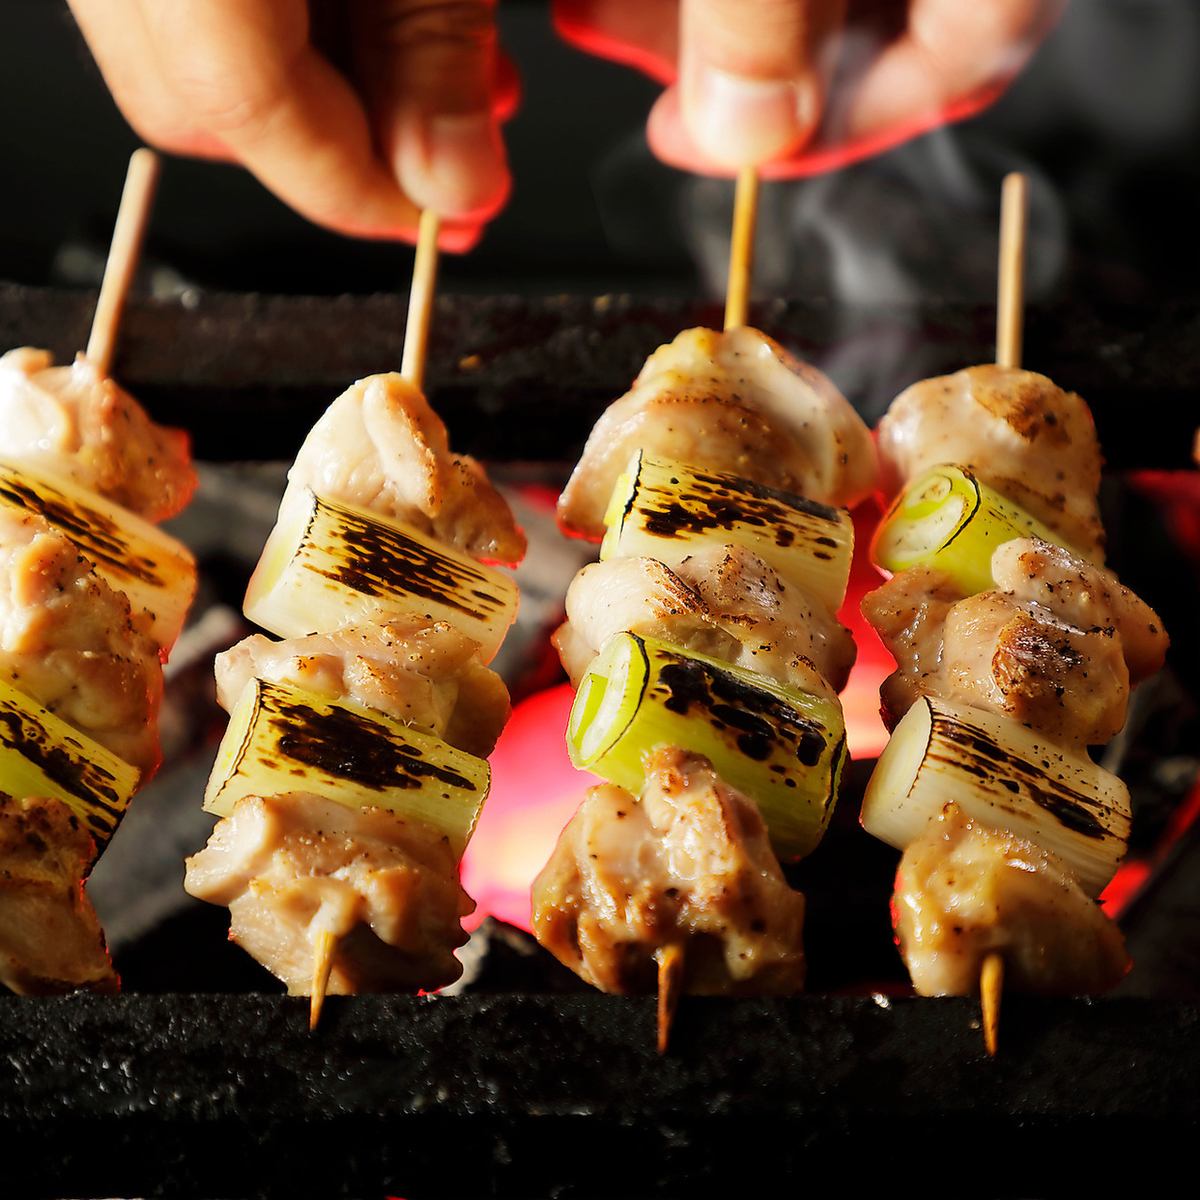 We offer all-you-can-eat delicious yakitori carefully grilled over charcoal.